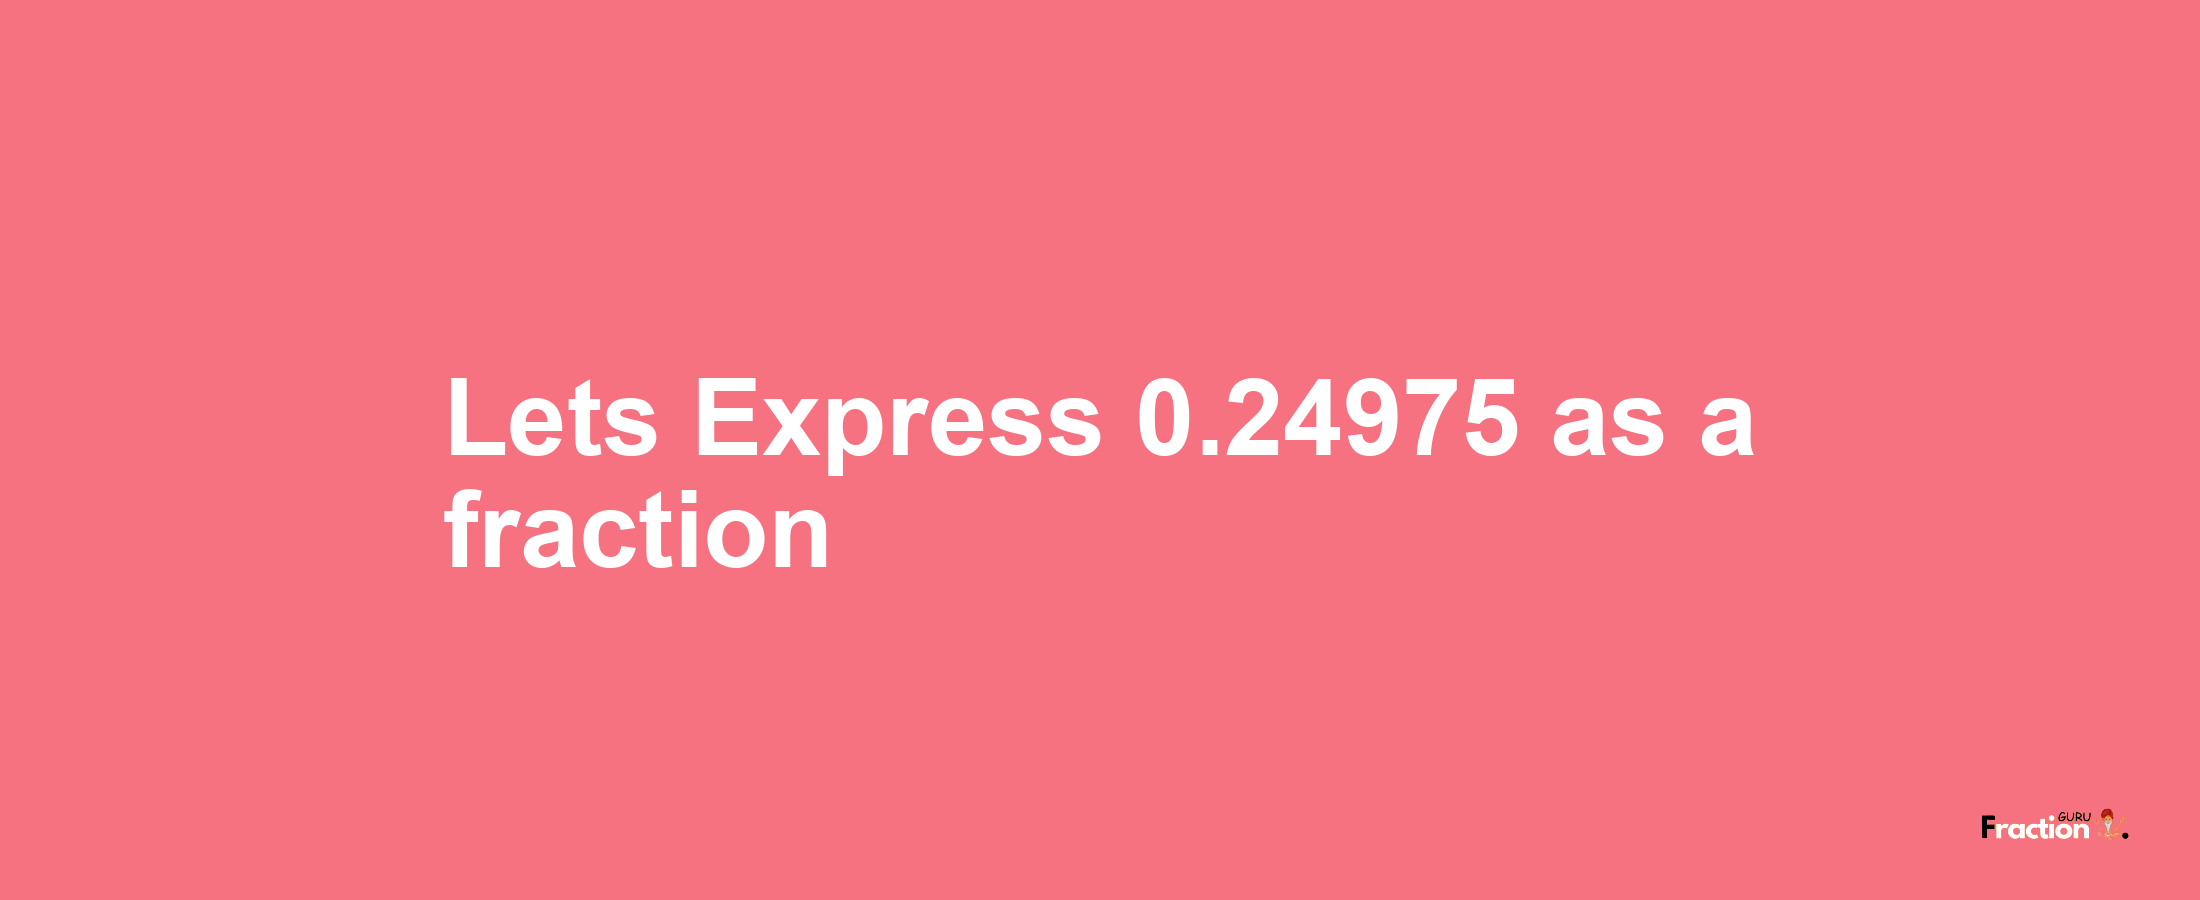 Lets Express 0.24975 as afraction